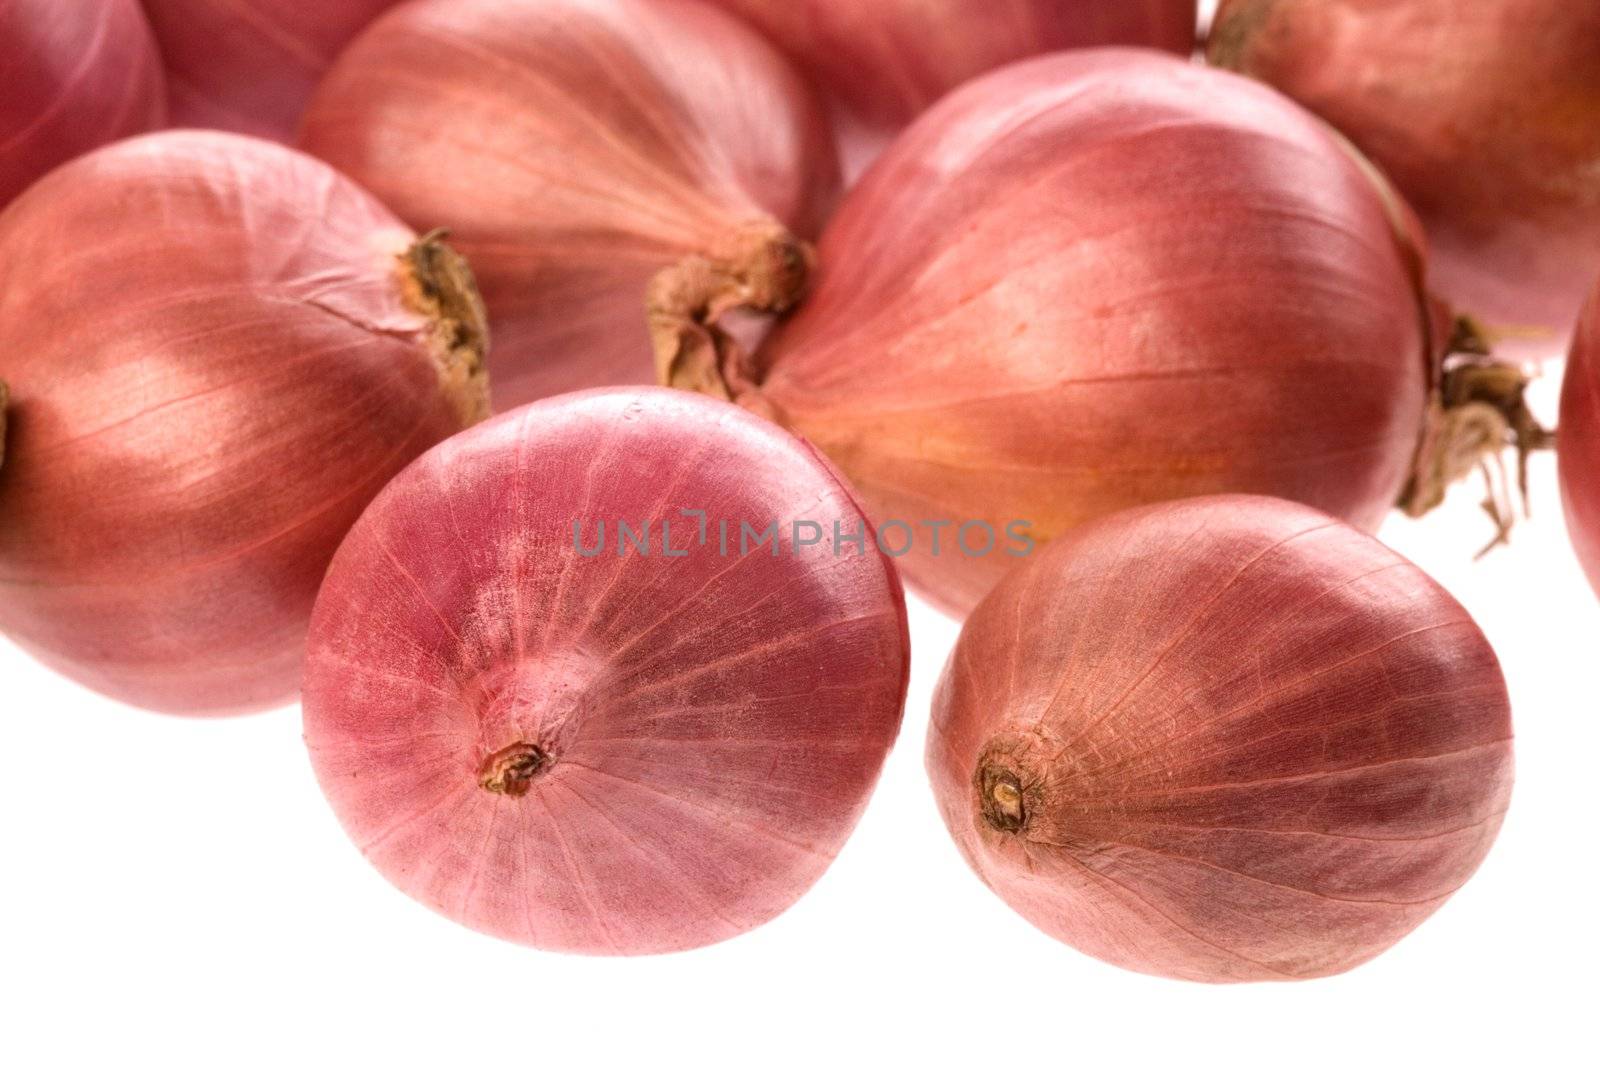 Isolated macro image of small onions.